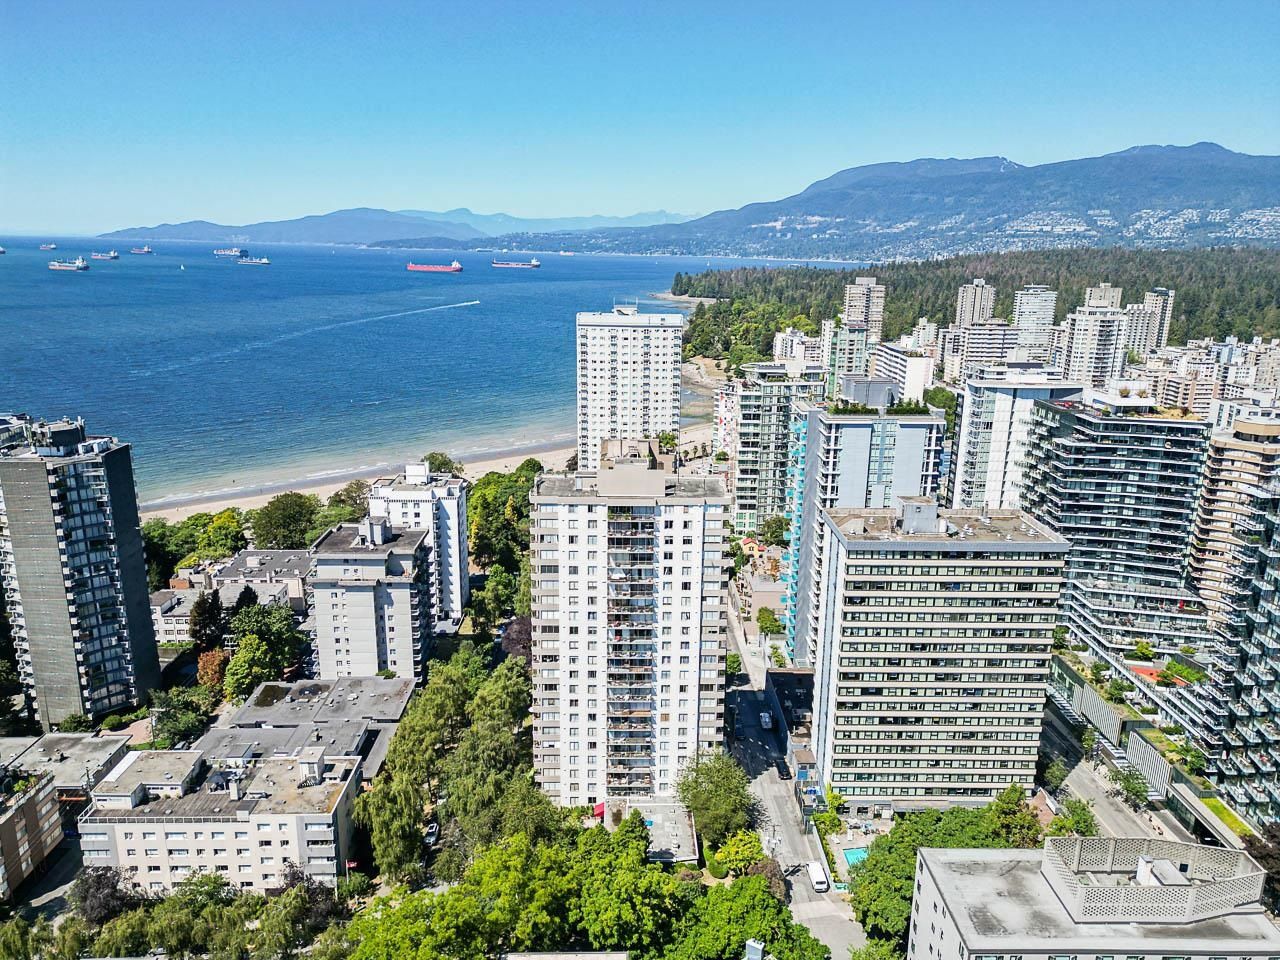 Can You Buy a Home in Vancouver for under $400,000?